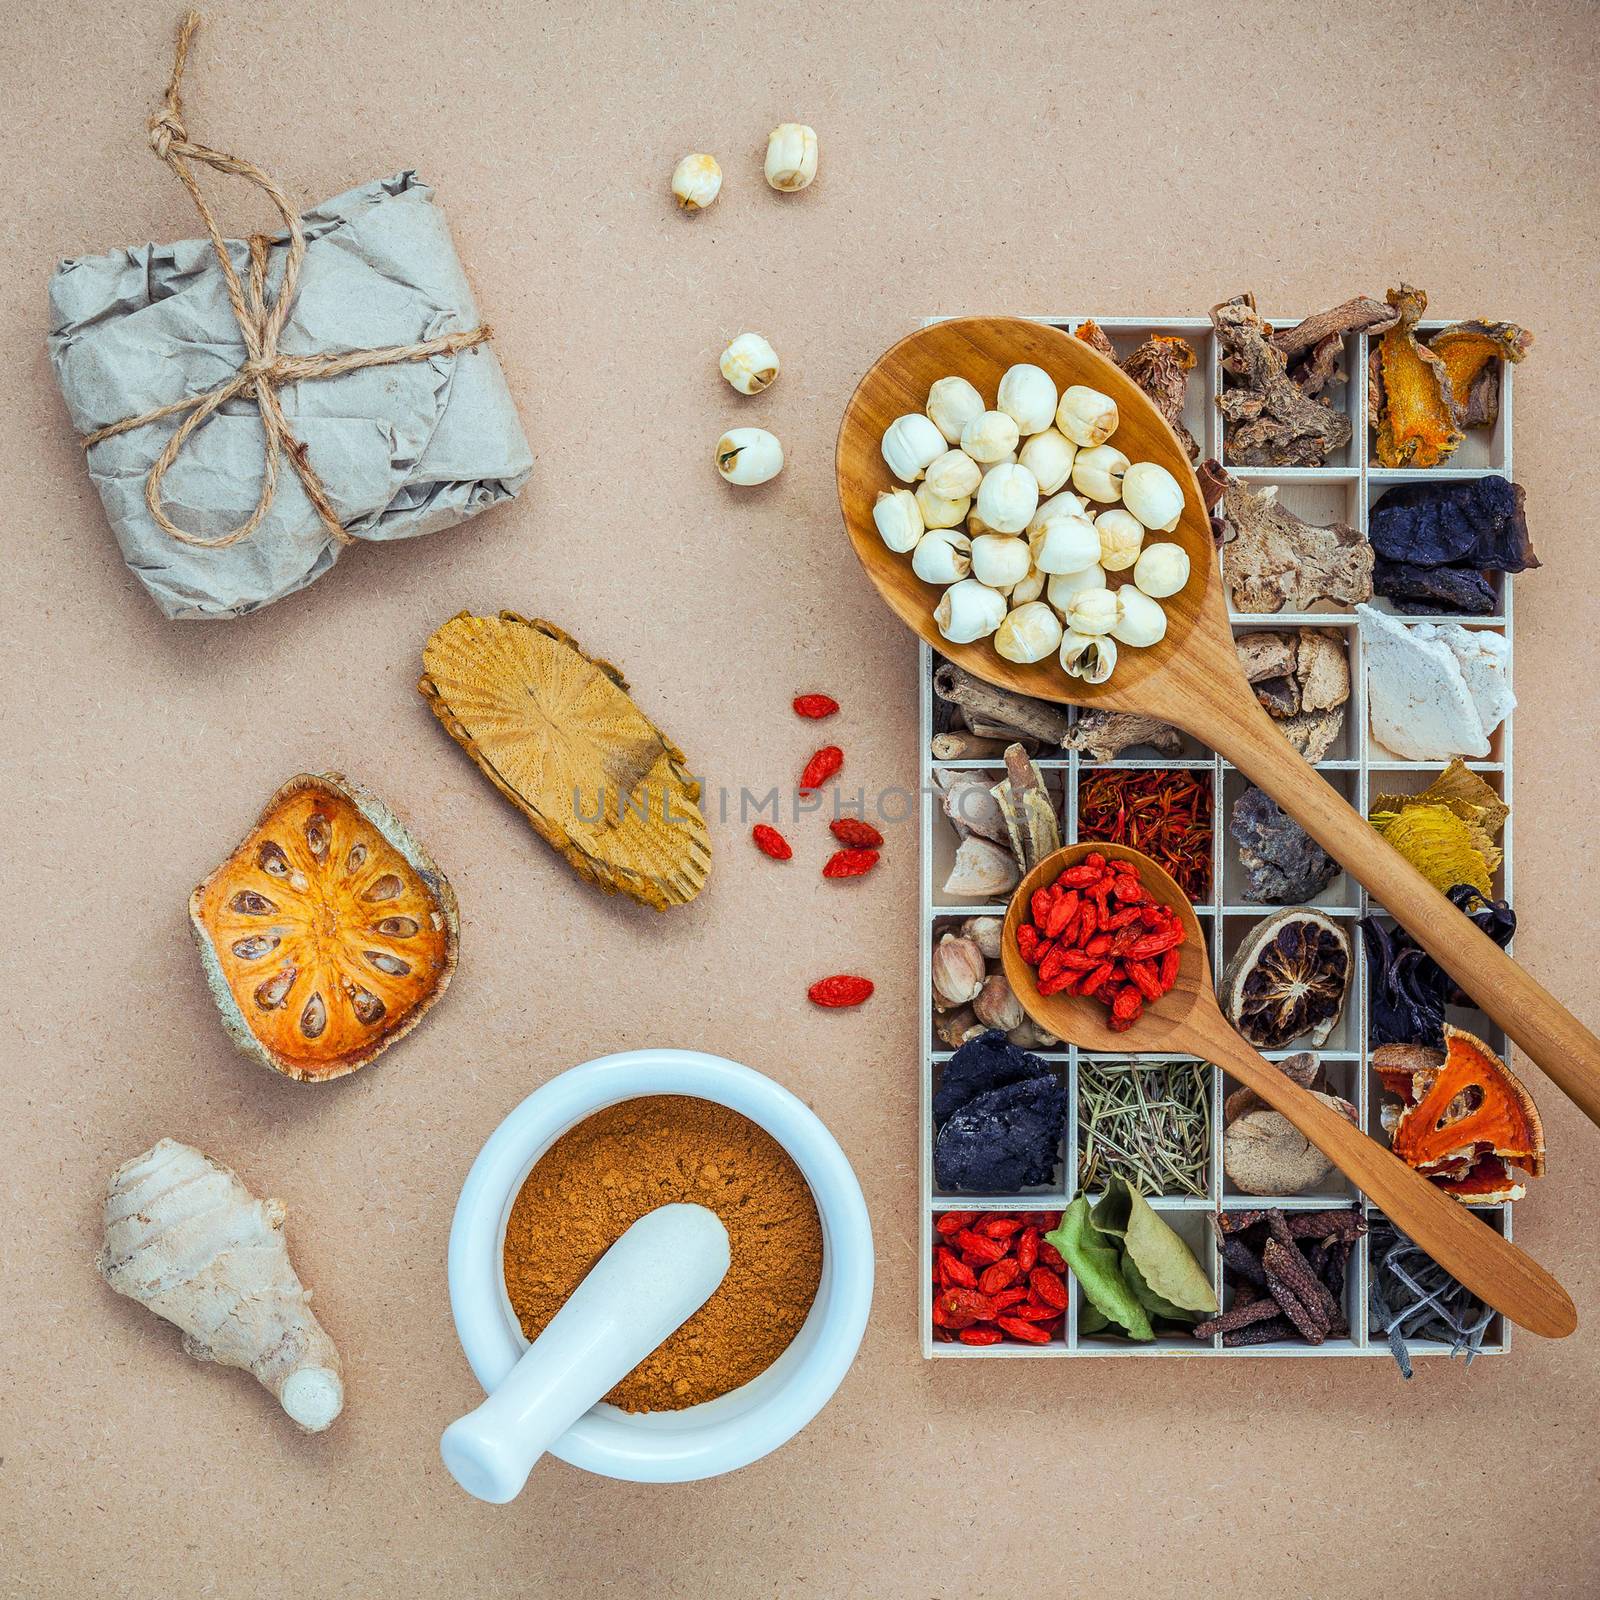 Alternative health care and herbal medicine. Dried various Chinese herbs in wooden box and lotus seeds in wooden spoon with white mortar on brown background flat lay.